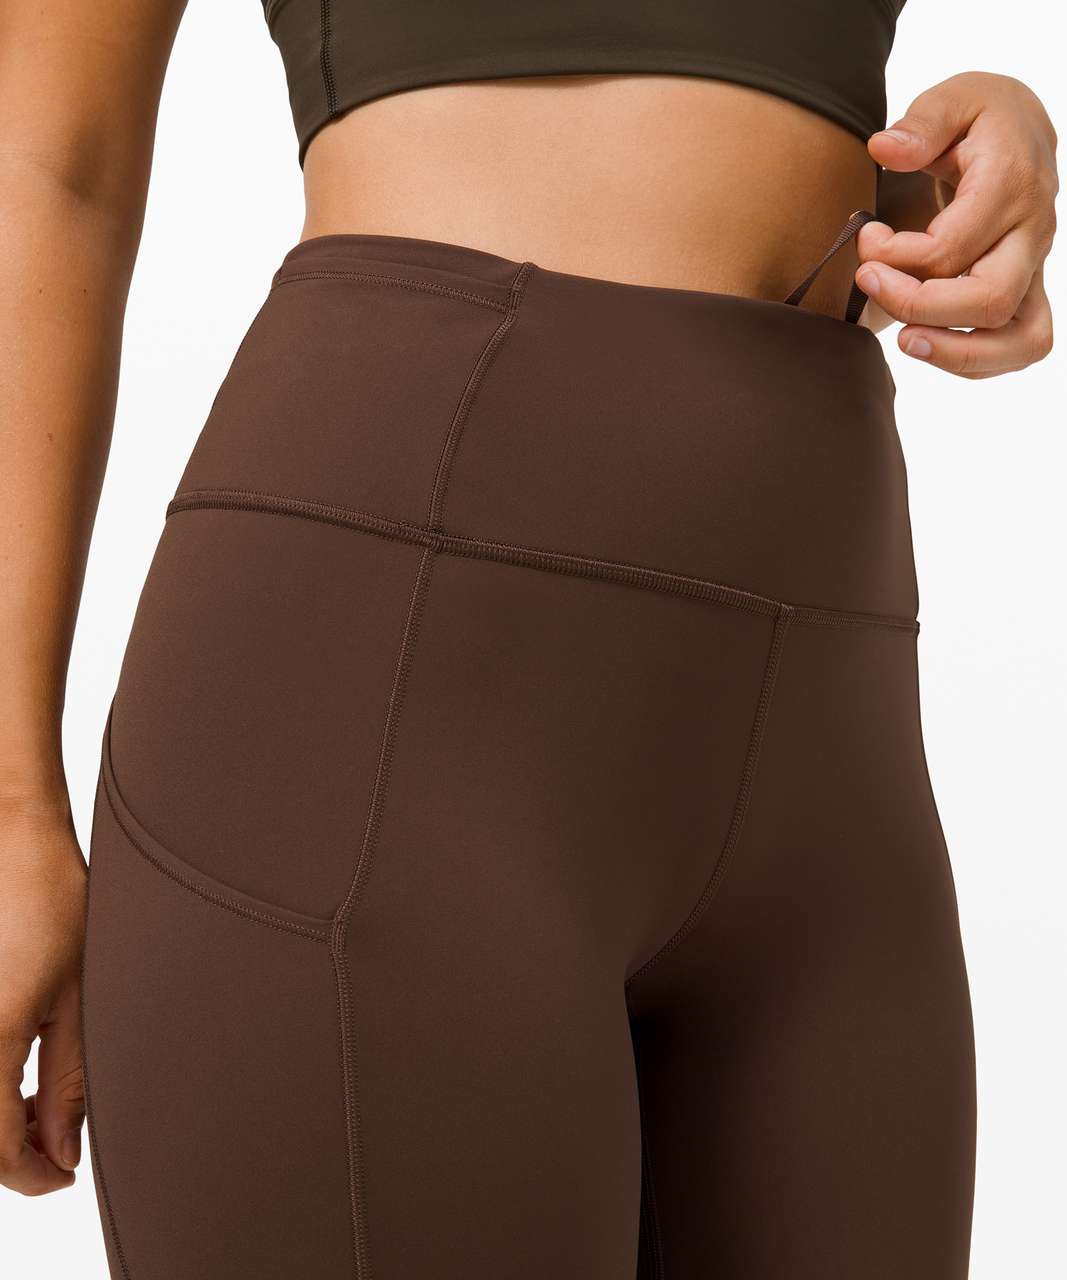 Lululemon Fast and Free High-Rise Tight 28" *Non-Reflective Brushed Nulux - Brown Earth